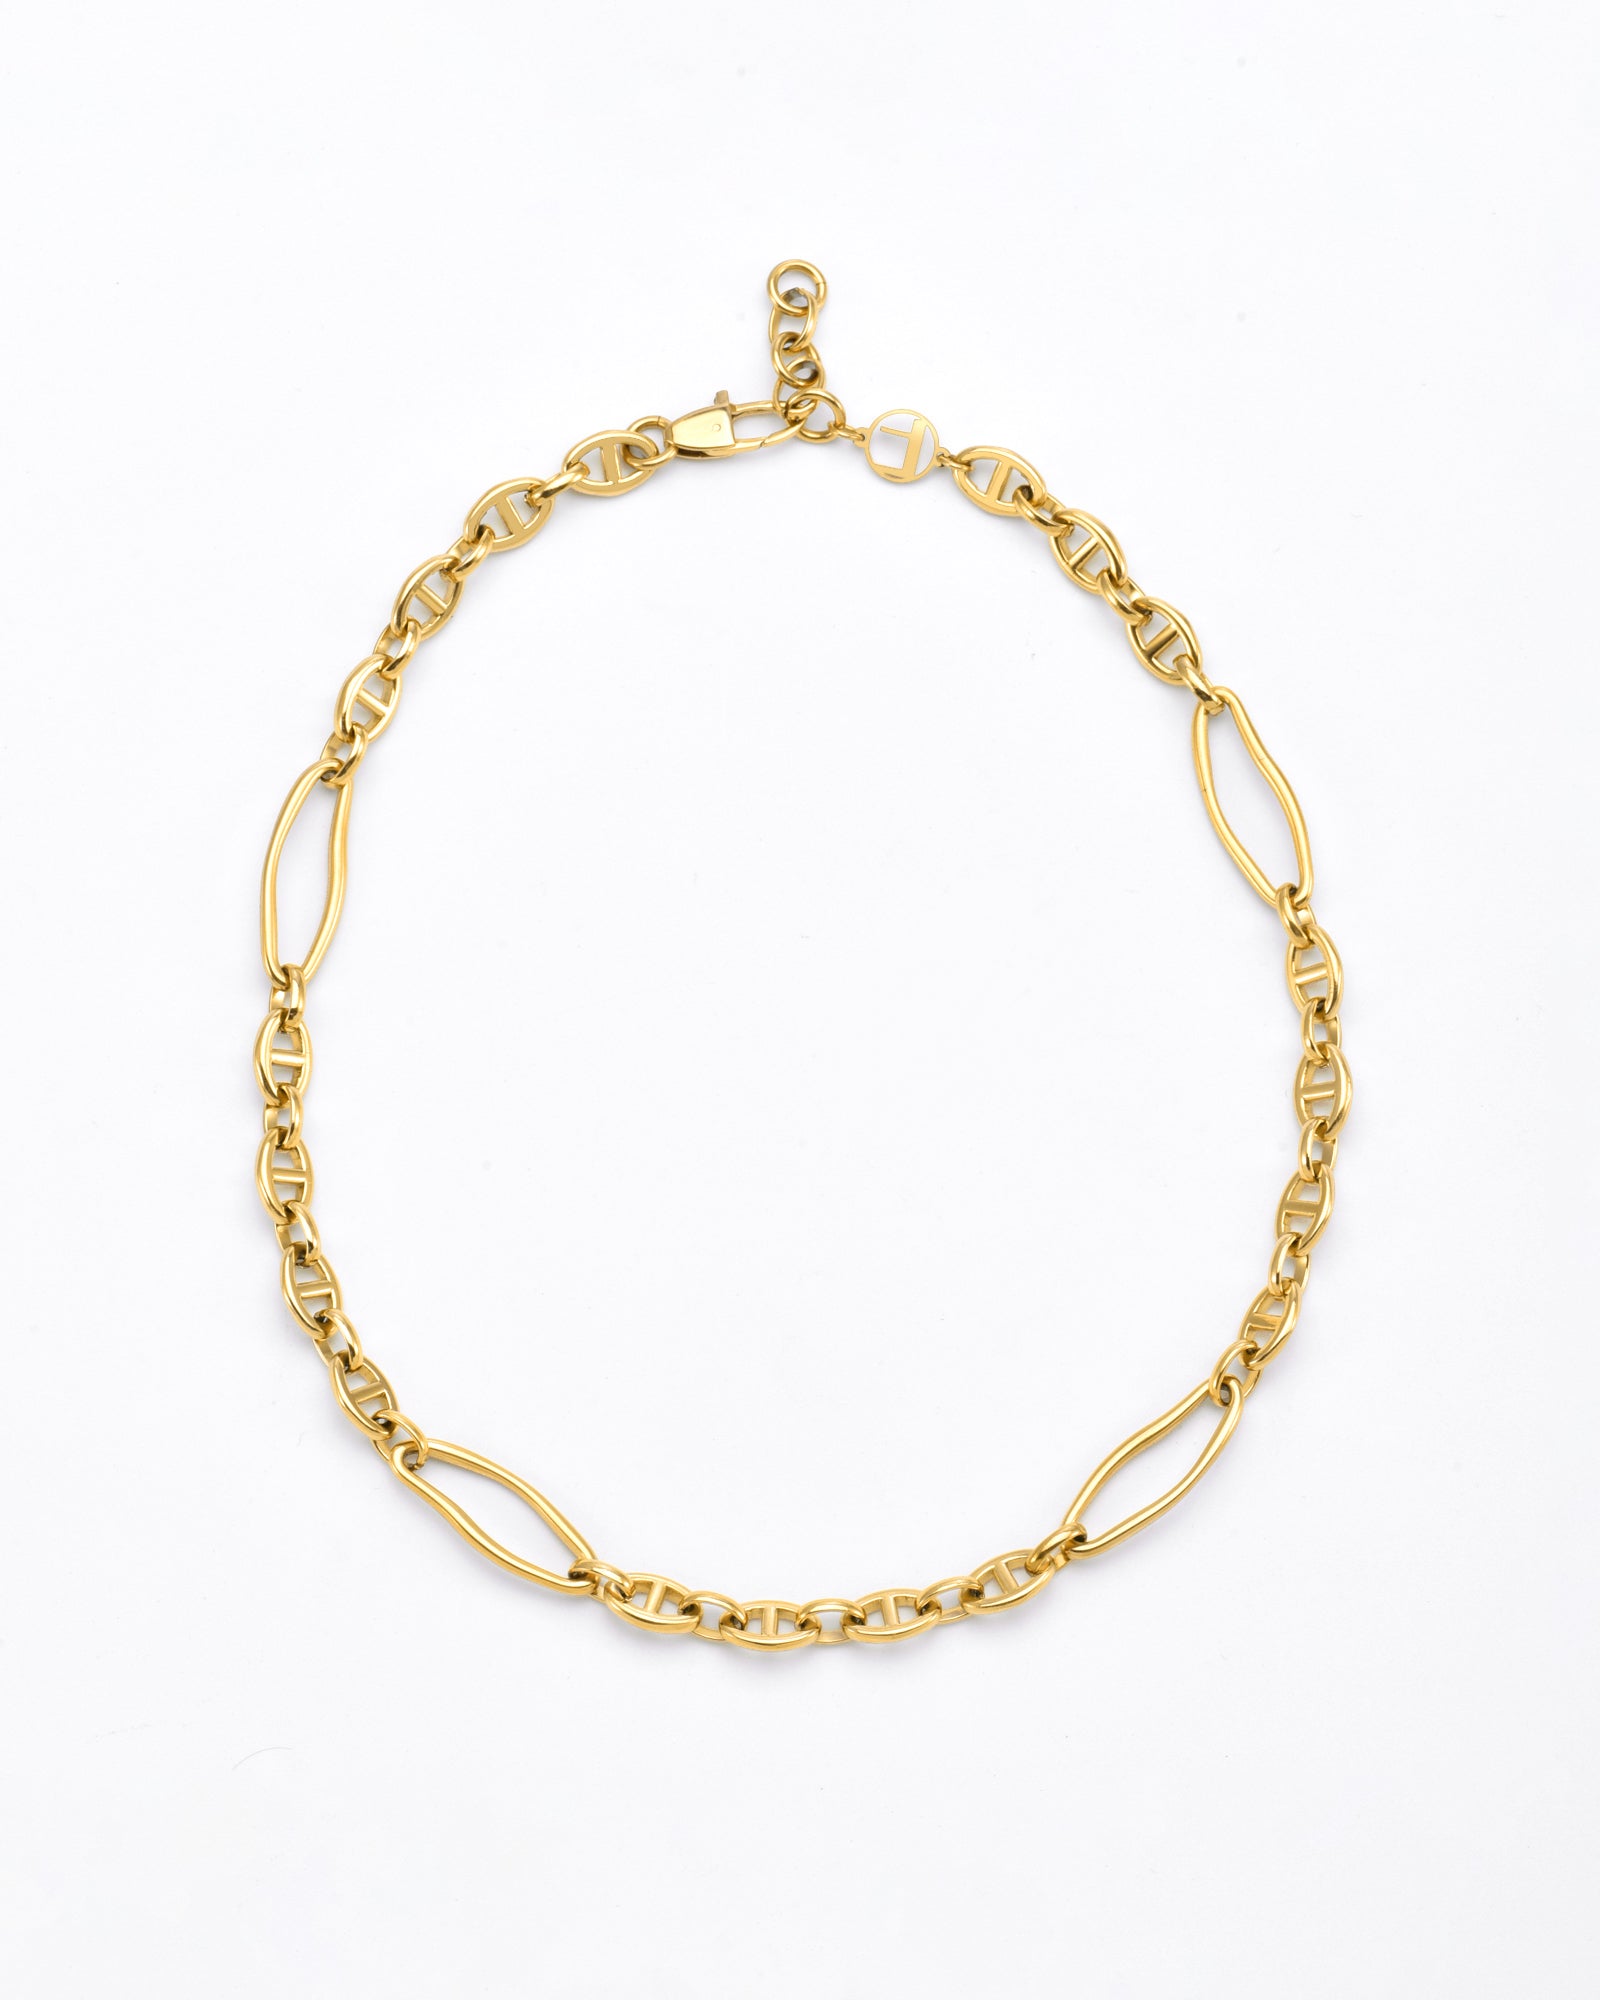 A For Art's Sake® Portrait Necklace Gold with an alternating pattern of small and elongated oval links. The design is intricate, with each link contributing to an elegant and sophisticated appearance. This portrait necklace features a clasp at the top center, set against a plain white background.